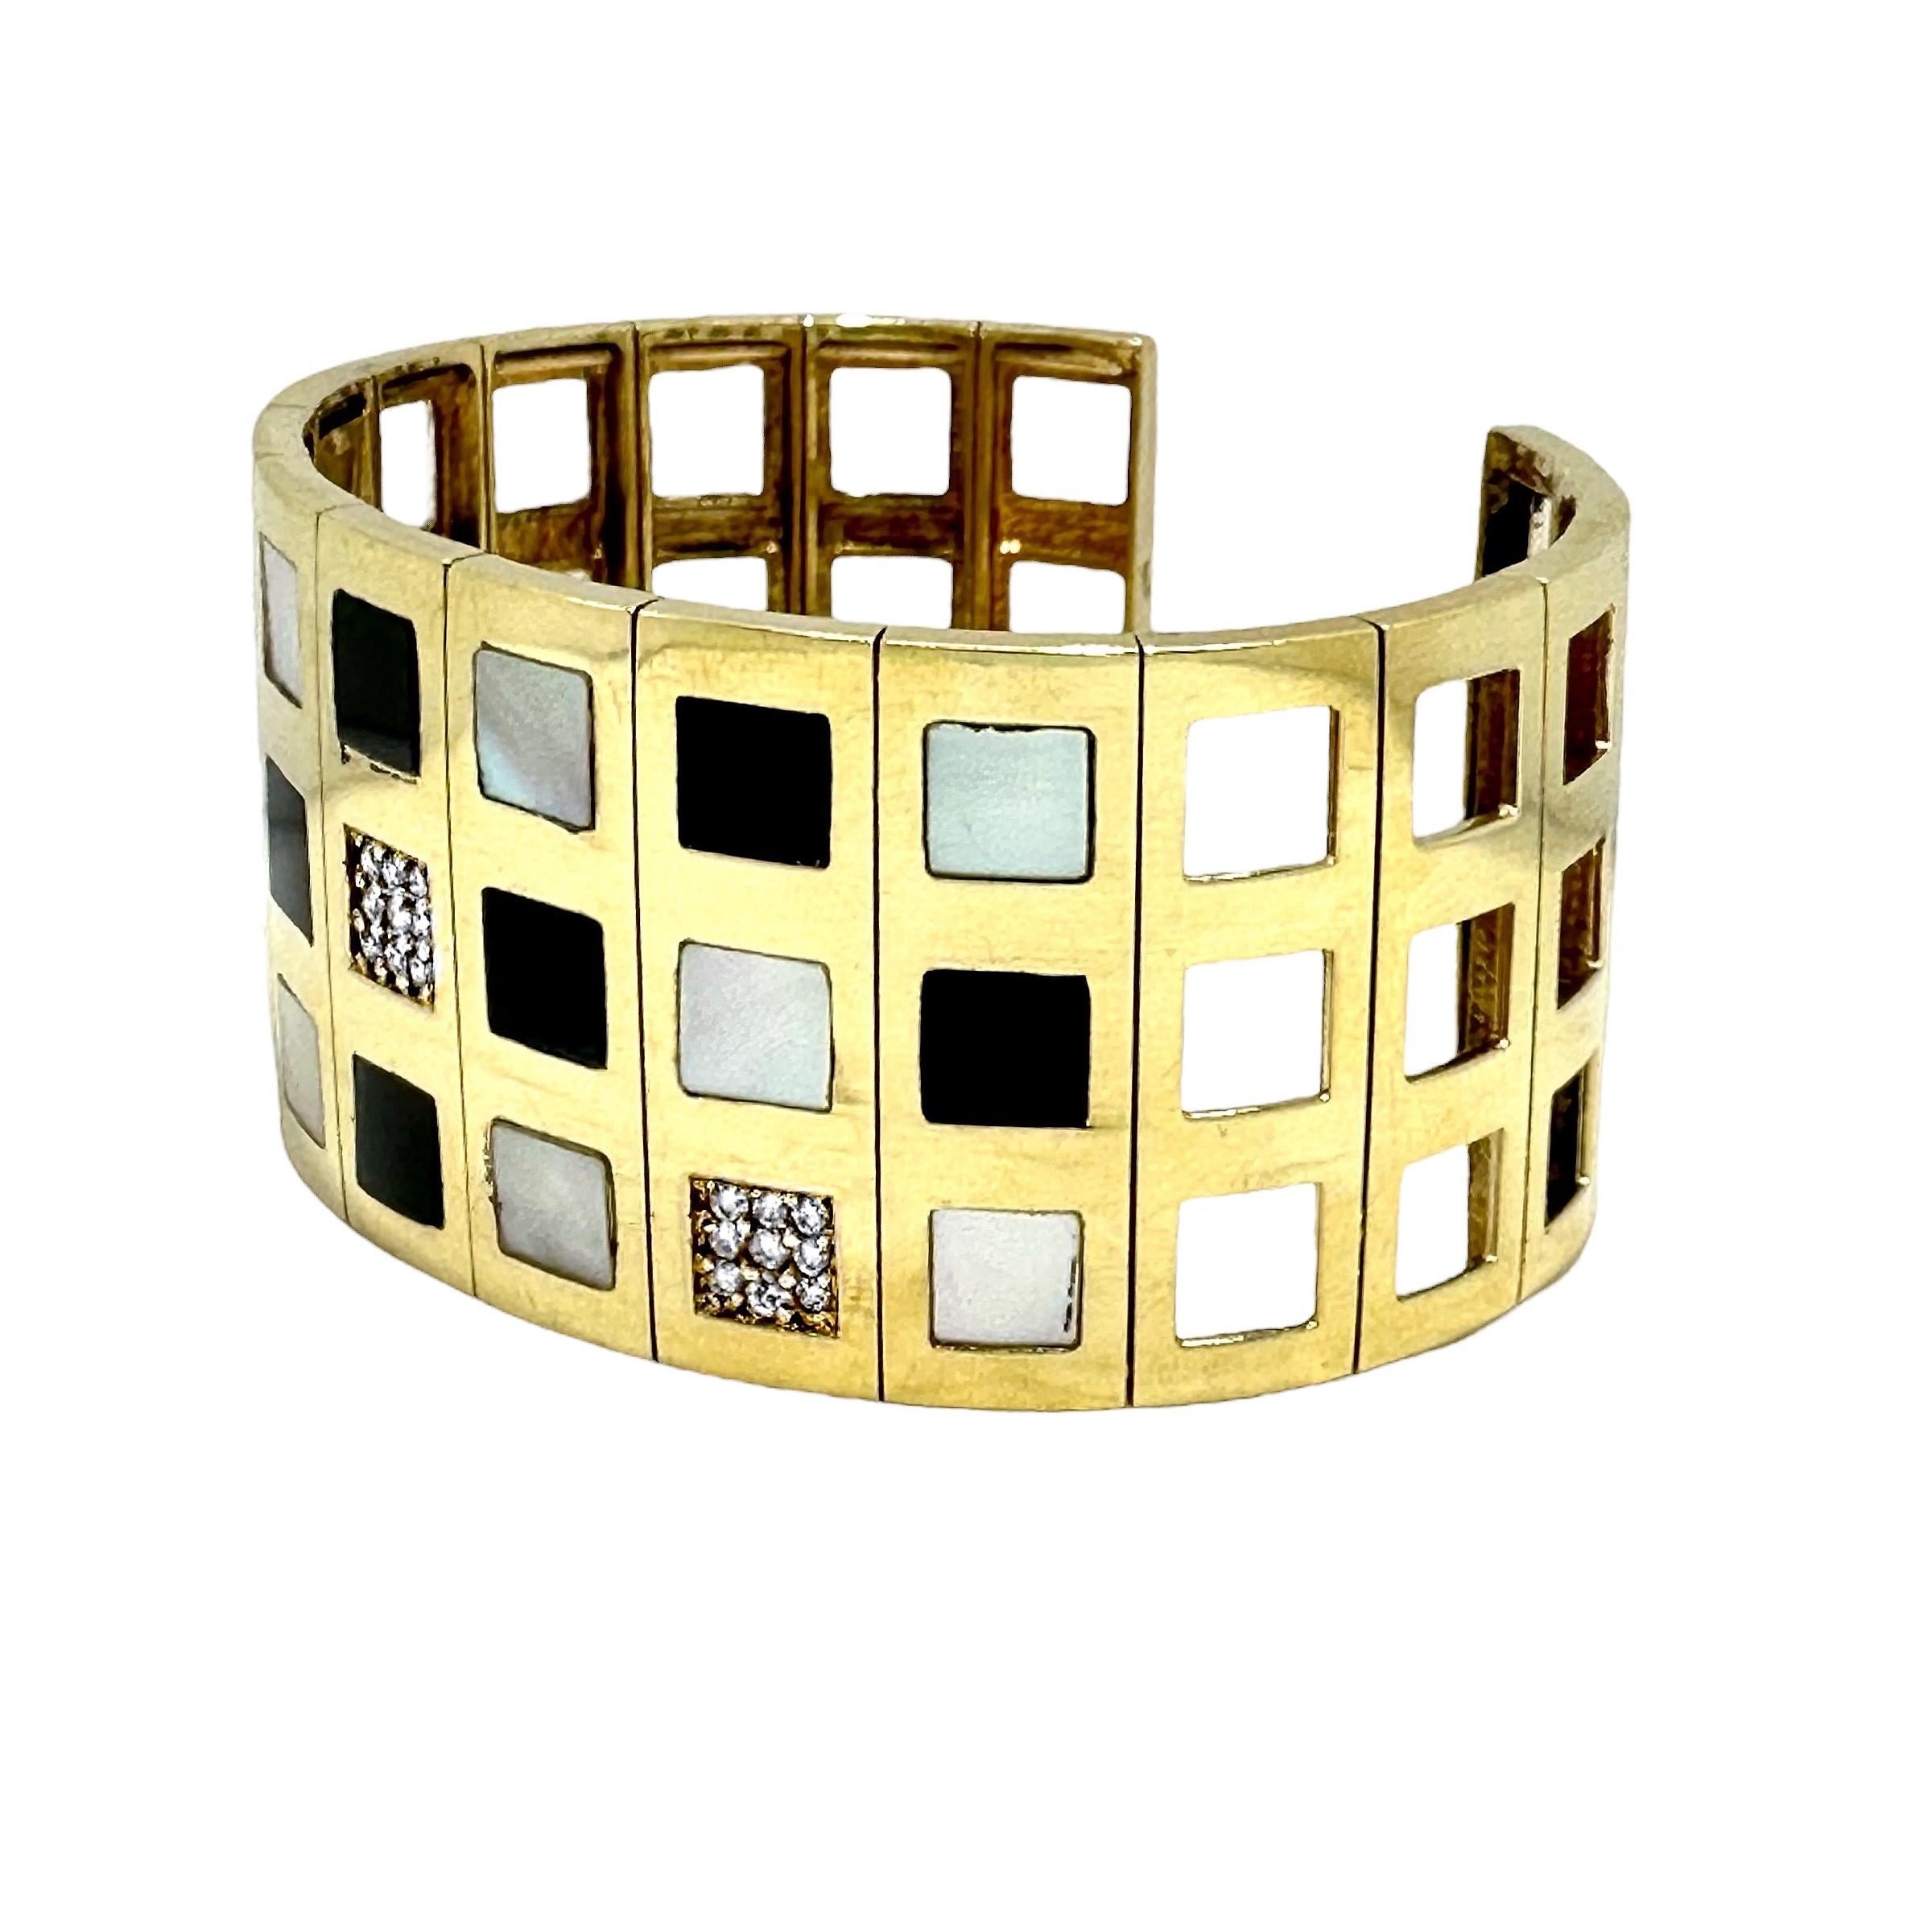 Flexible Bangle Bracelet with Diamonds, Mother of Pearl & Onyx For Sale 2